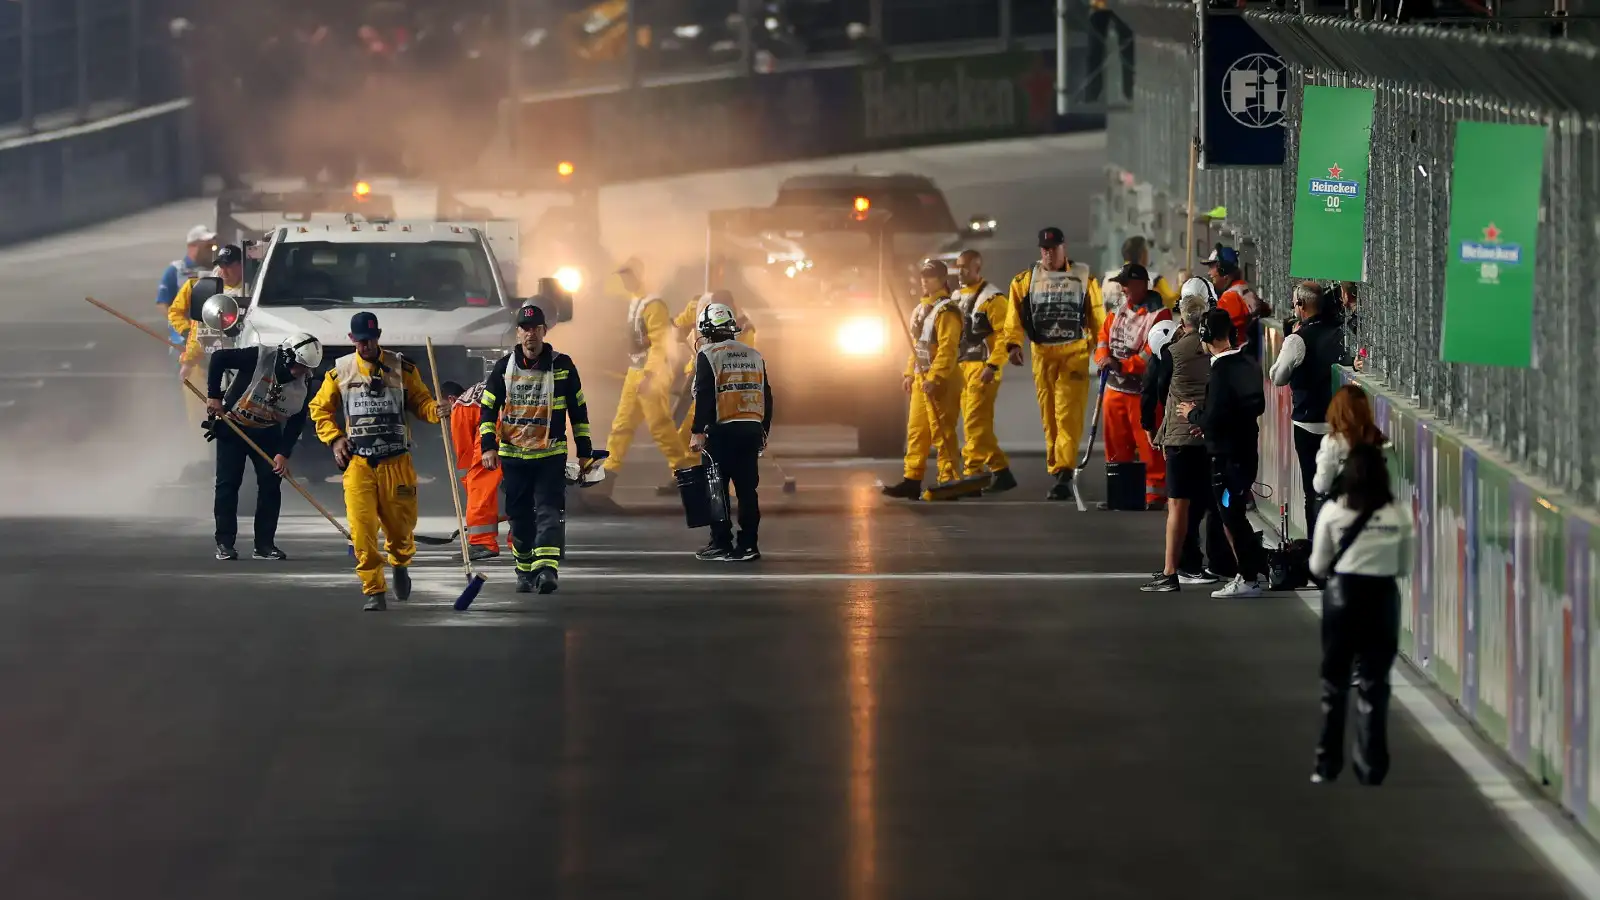 Crews work to clear up an oil spill ahead of the Las Vegas Grand Prix start.